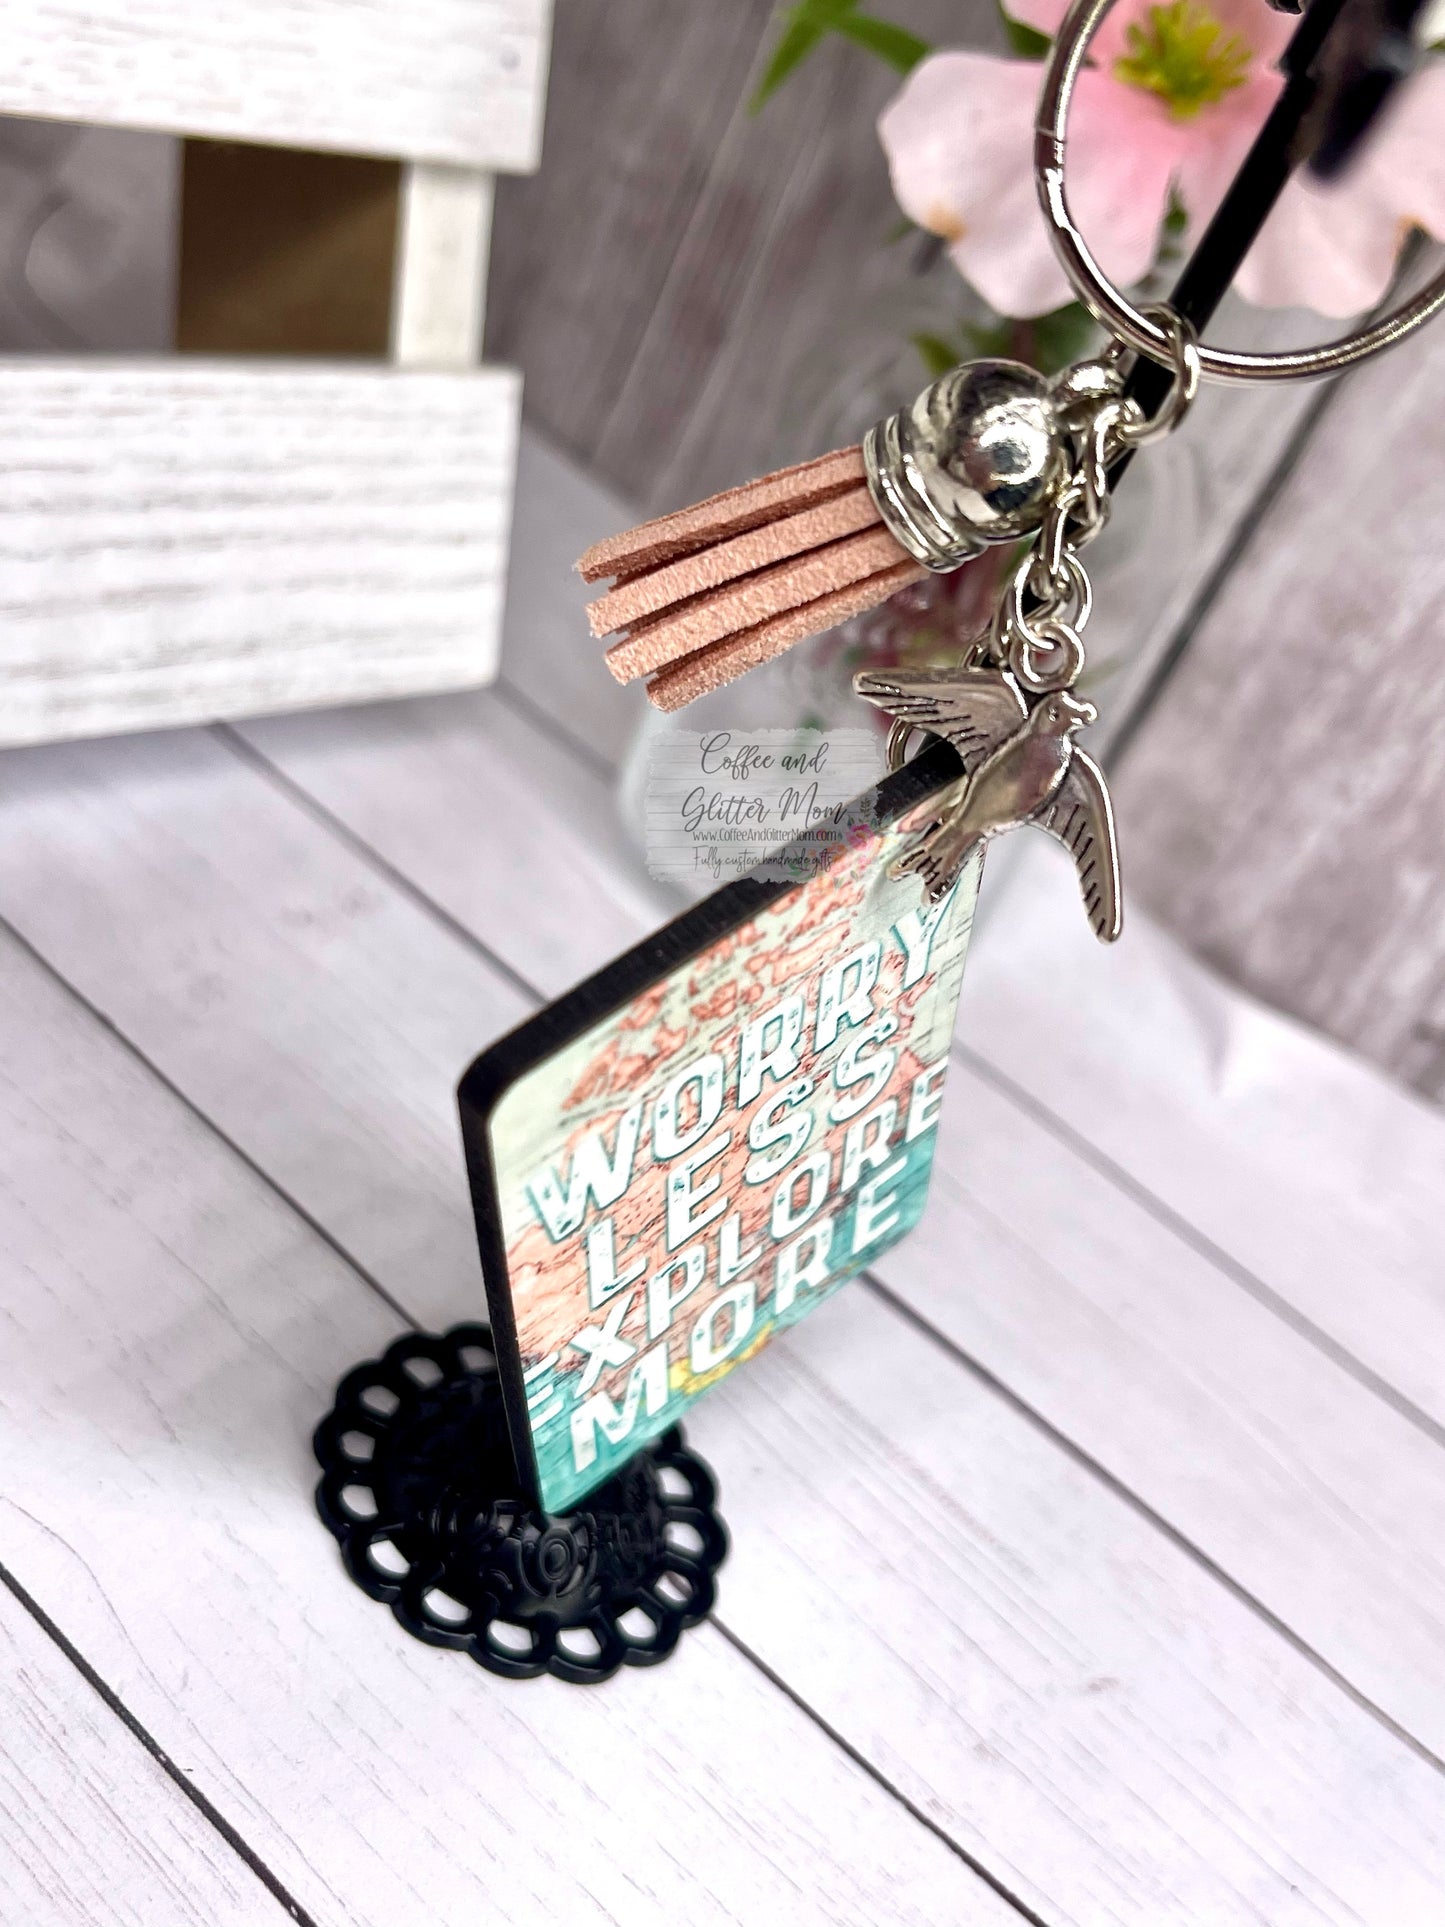 Explore More Worry Less Keychain